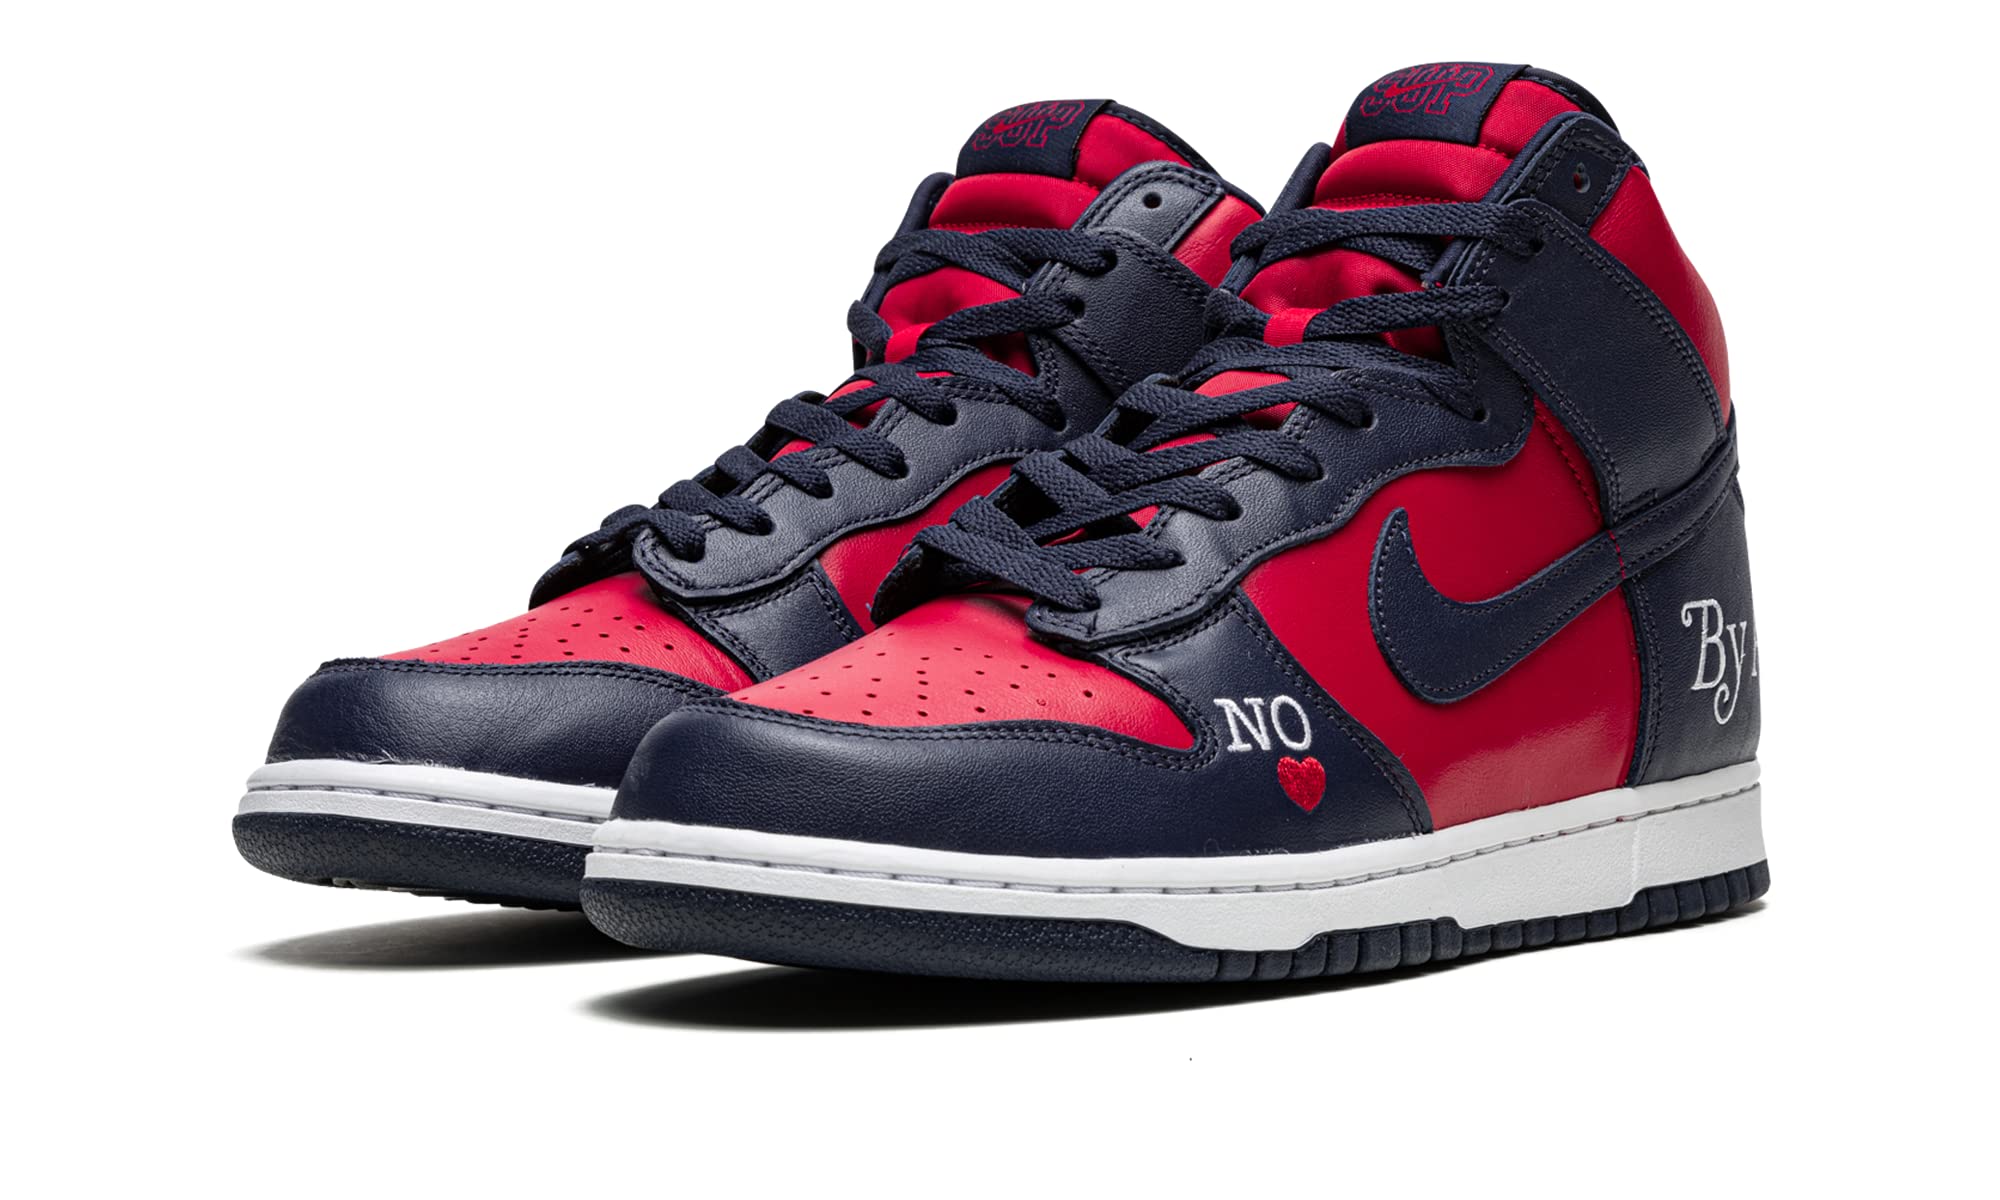 Nike Mens SB Dunk High DN3741 600 Supreme - by Any Means - Navy/Red - Size 10